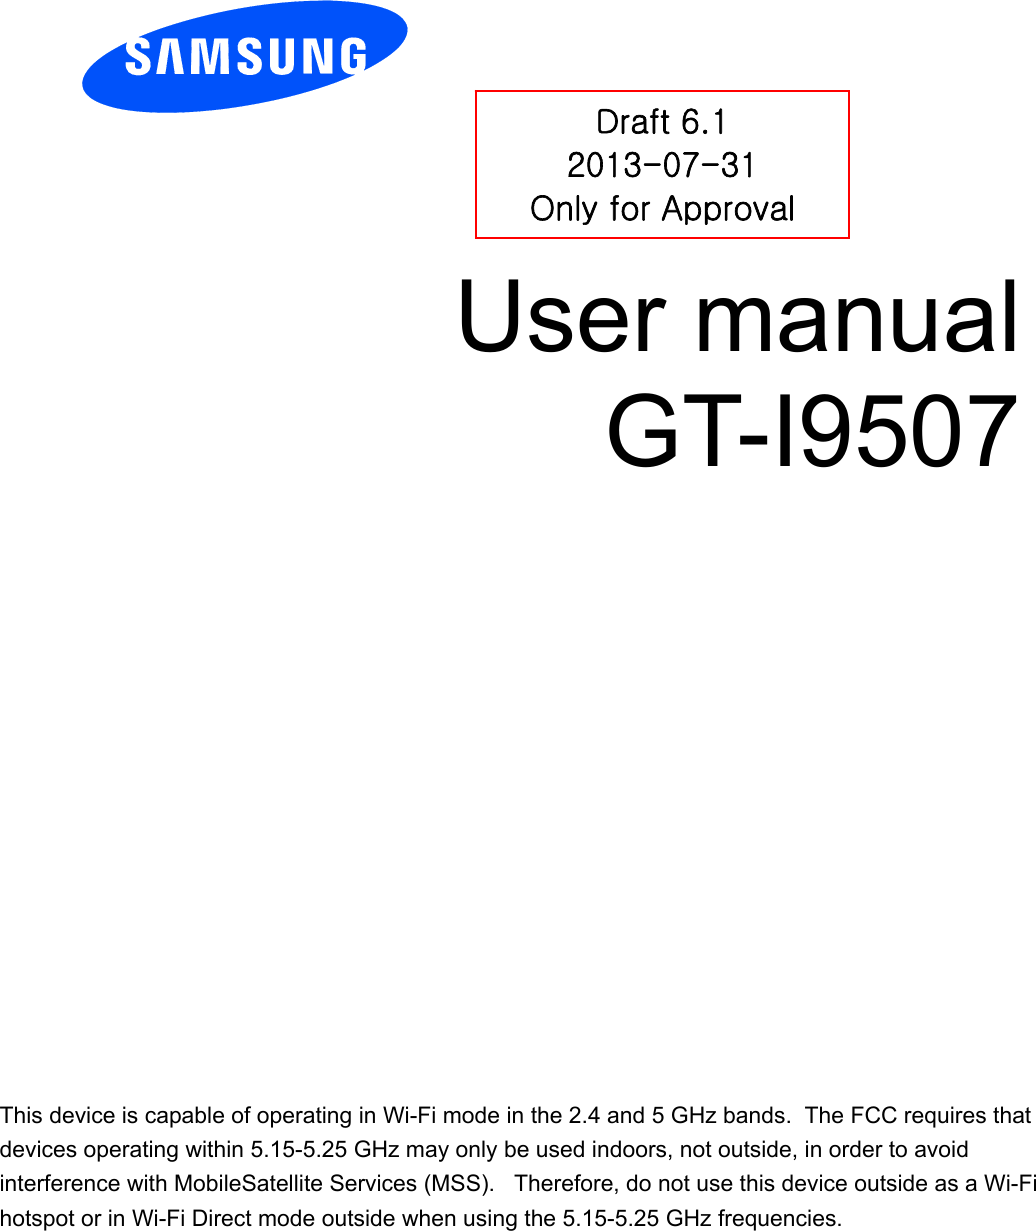          User manual GT-I9507          Draft 6.1 2013-07-31 Only for Approval This device is capable of operating in Wi-Fi mode in the 2.4 and 5 GHz bands.  The FCC requires that devices operating within 5.15-5.25 GHz may only be used indoors, not outside, in order to avoid interference with MobileSatellite Services (MSS).   Therefore, do not use this device outside as a Wi-Fi hotspot or in Wi-Fi Direct mode outside when using the 5.15-5.25 GHz frequencies.